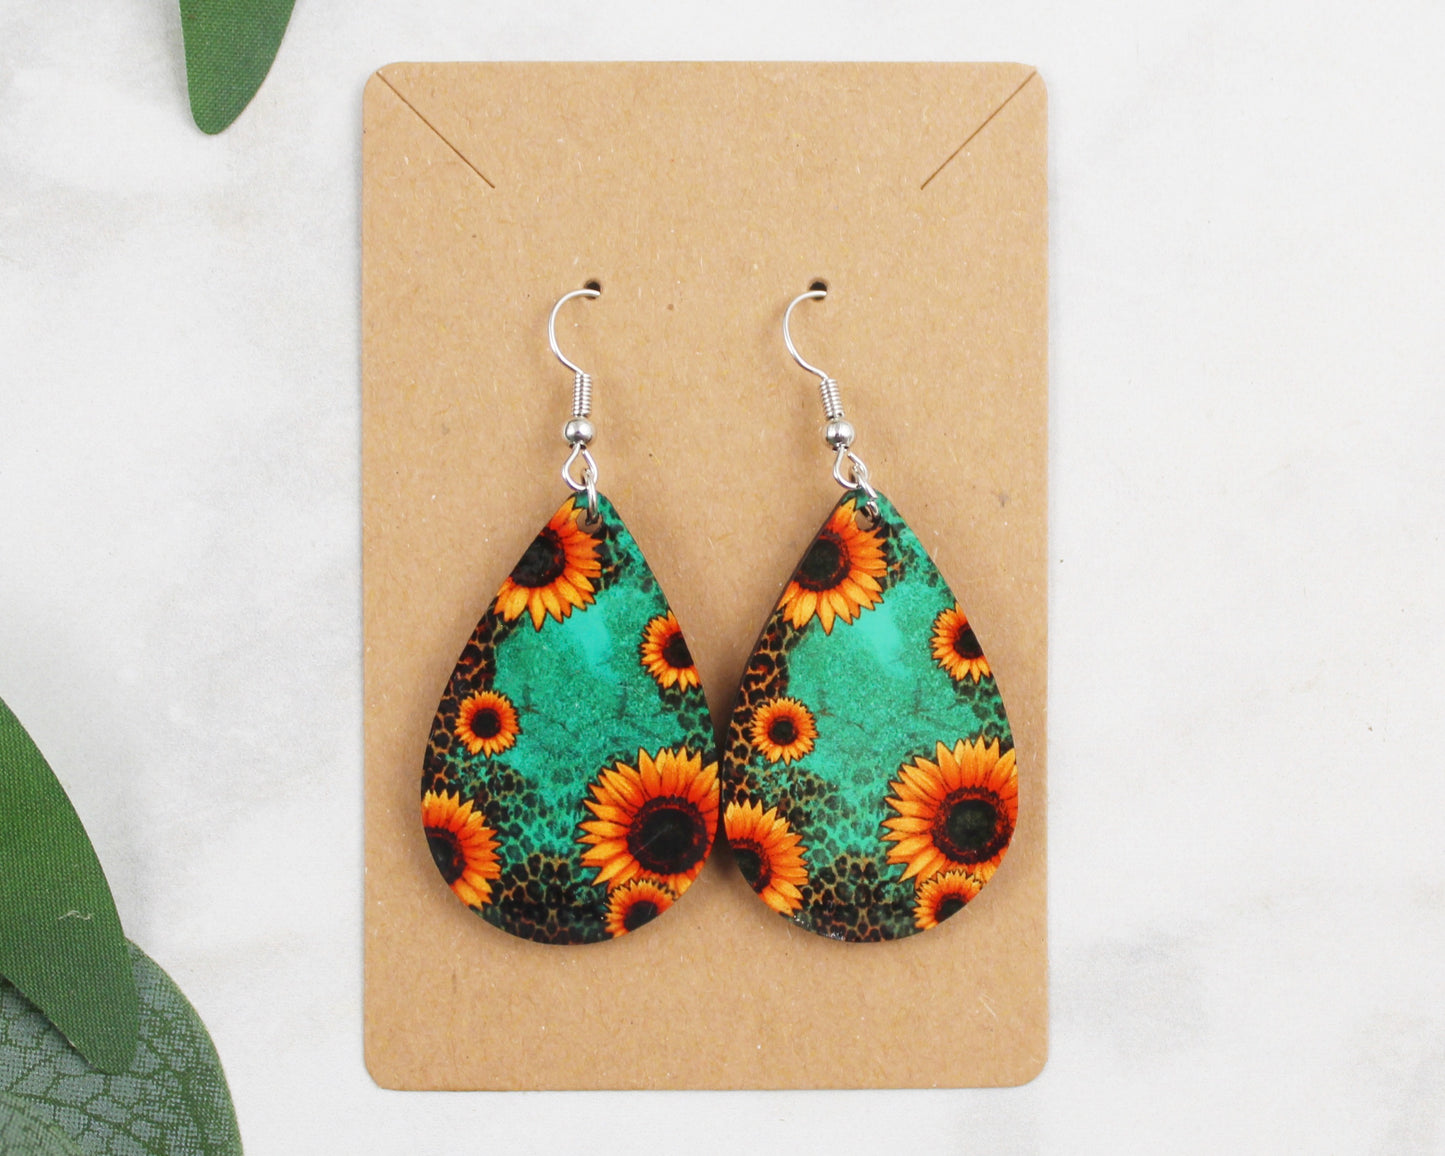 Teal with Sunflowers and Cheetah Tear Drop Earrings